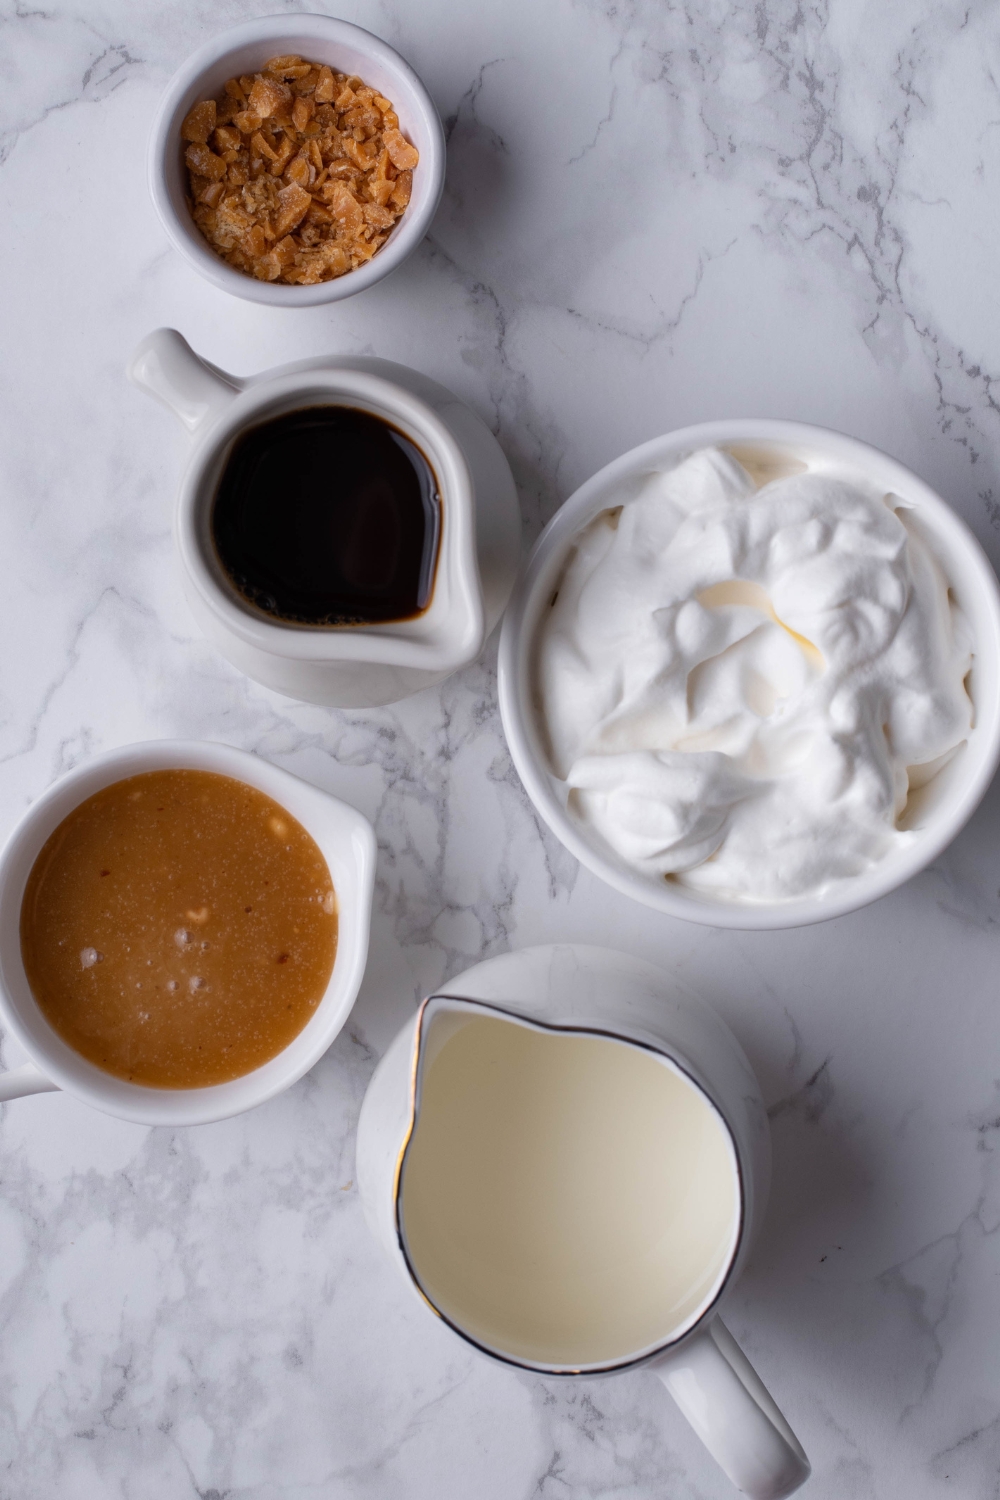 A countertop with a small bowl of whipped cream, a small bowl of caramel sauce, a pitcher of coffee, a small bowl of crumbly topping, and a small pitcher of milk.